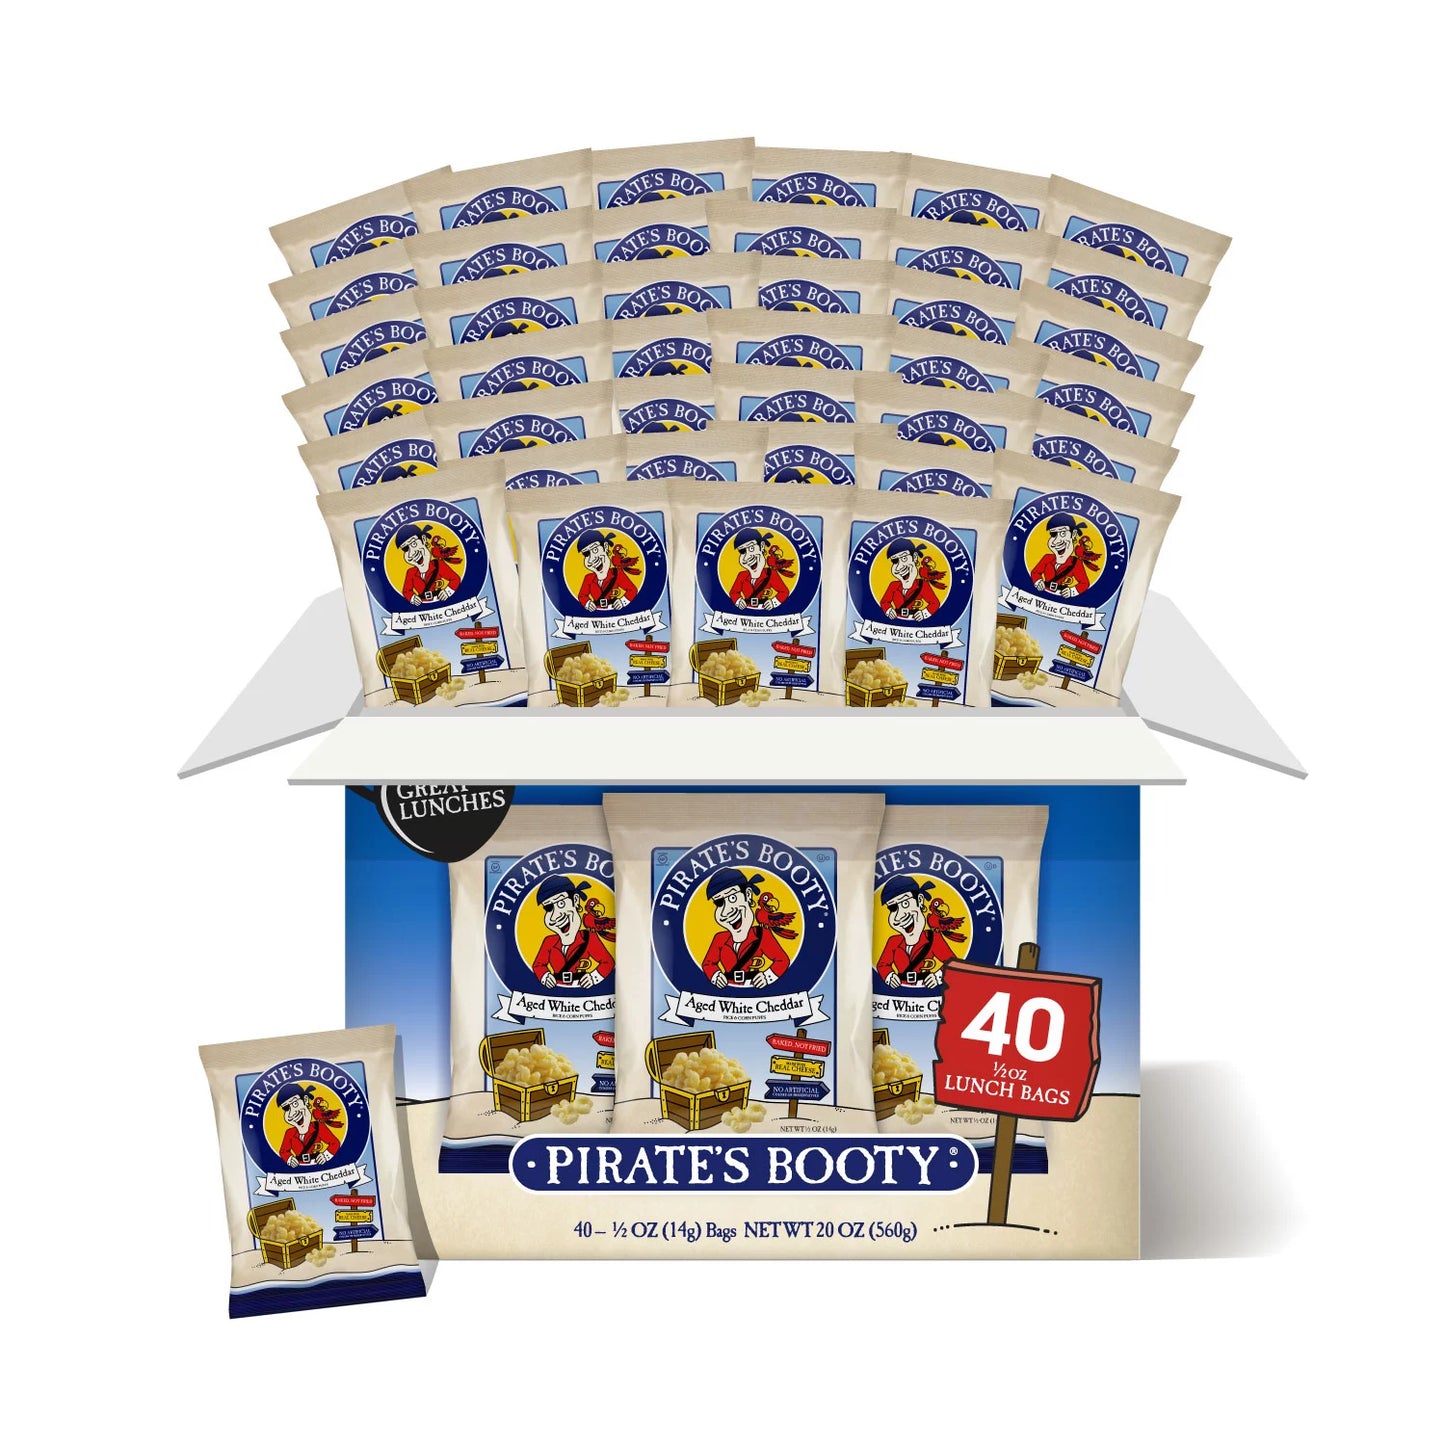 Pirate's Booty Aged White Cheddar Snack, 0.5 oz, 40-count